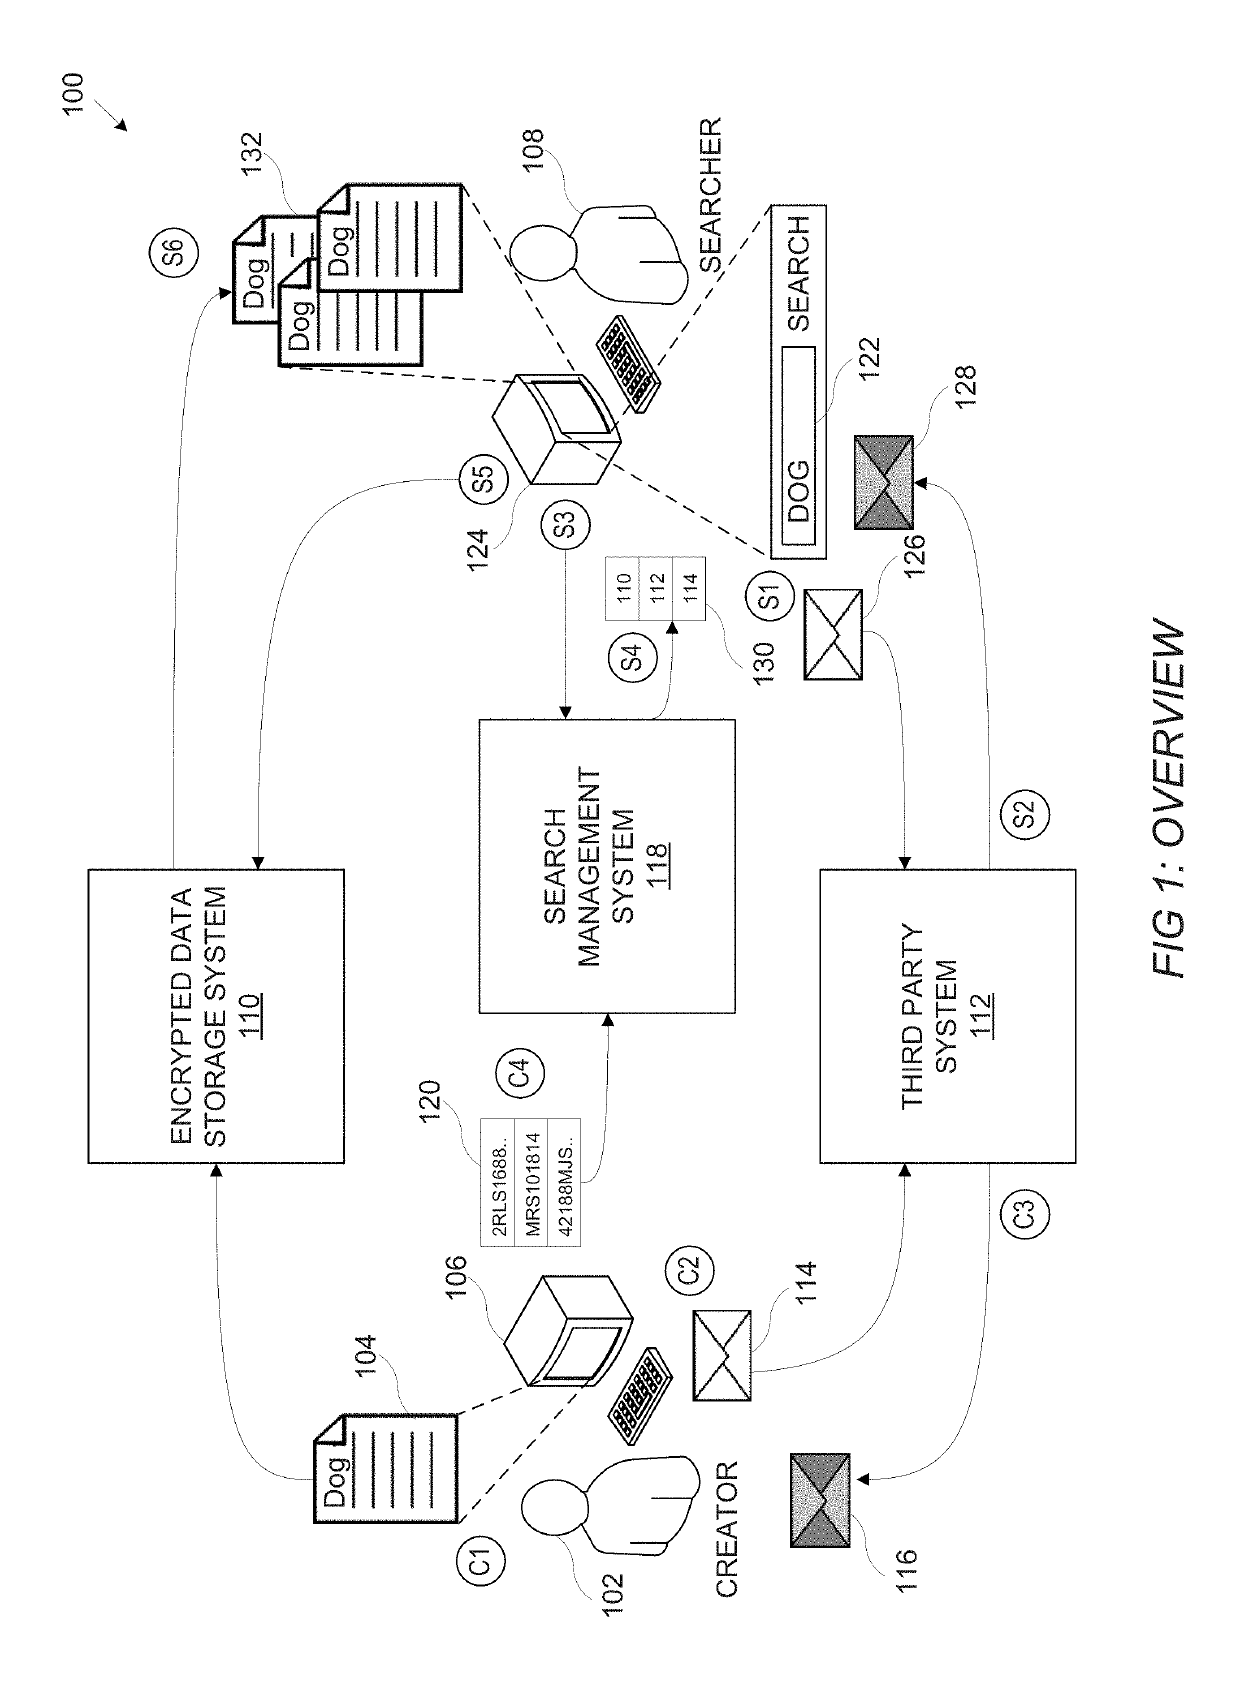 Systems and methods for cryptographically-secure queries using filters generated by multiple parties